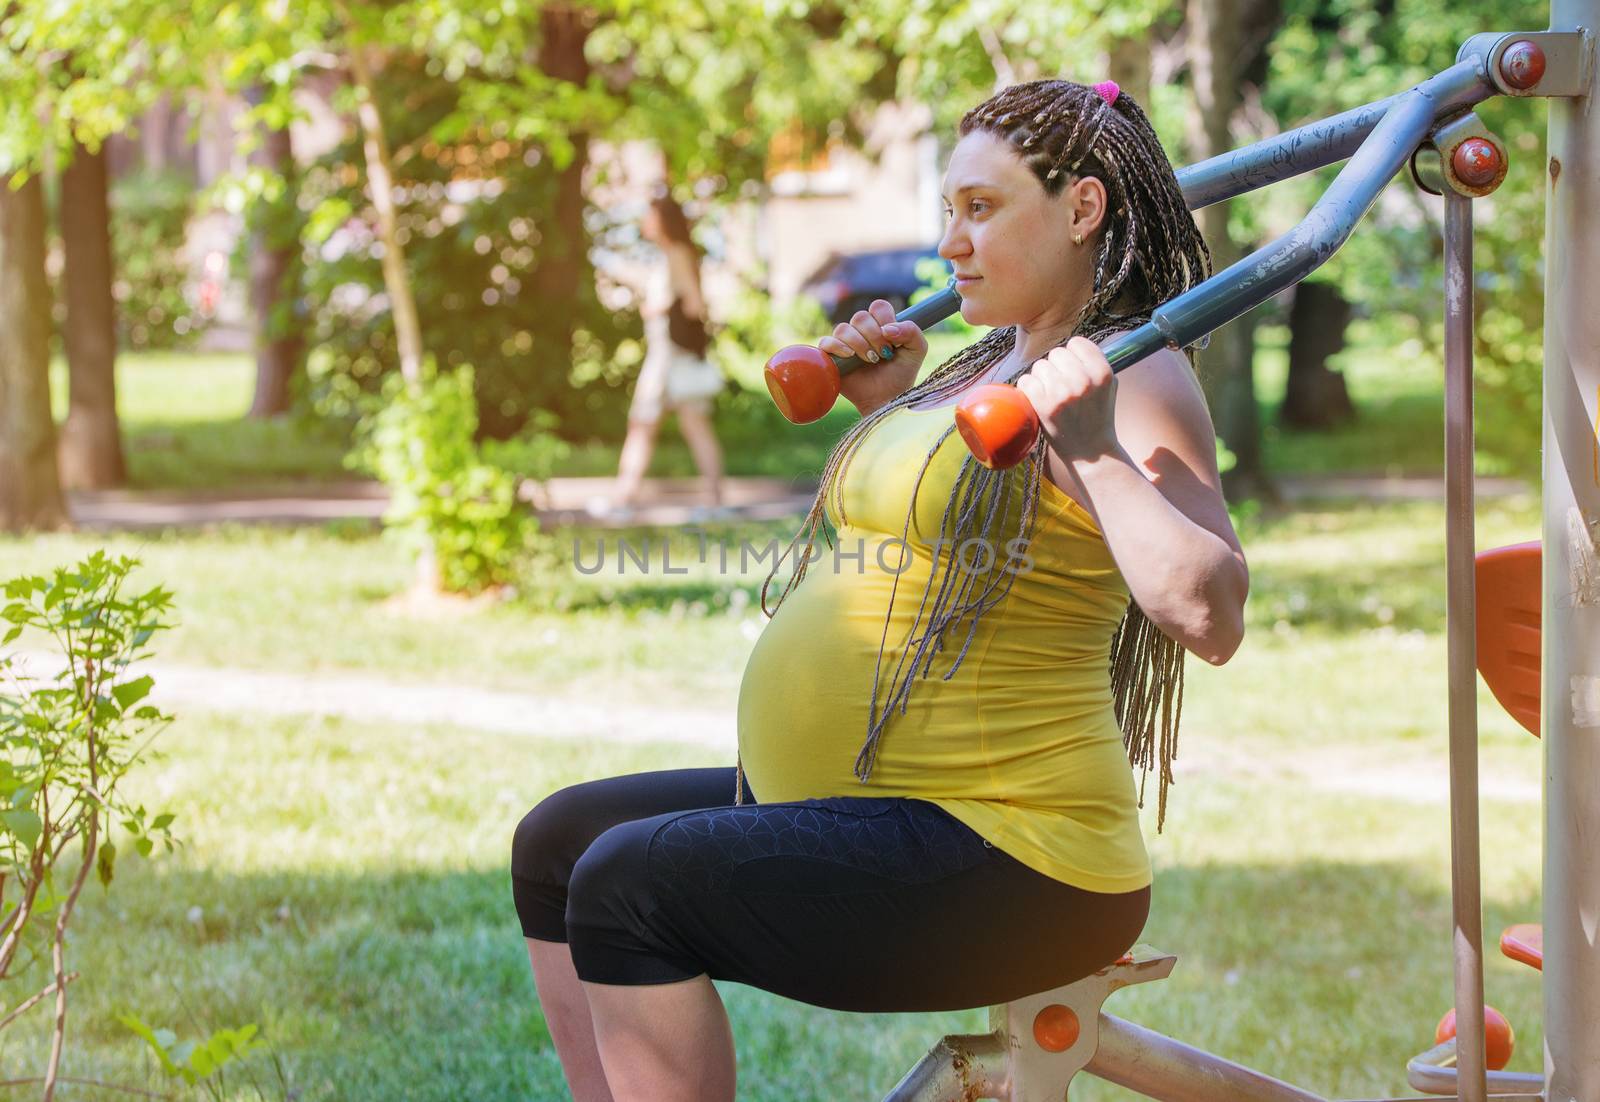 Pregnant woman exercising outdoors in public gym in the park.